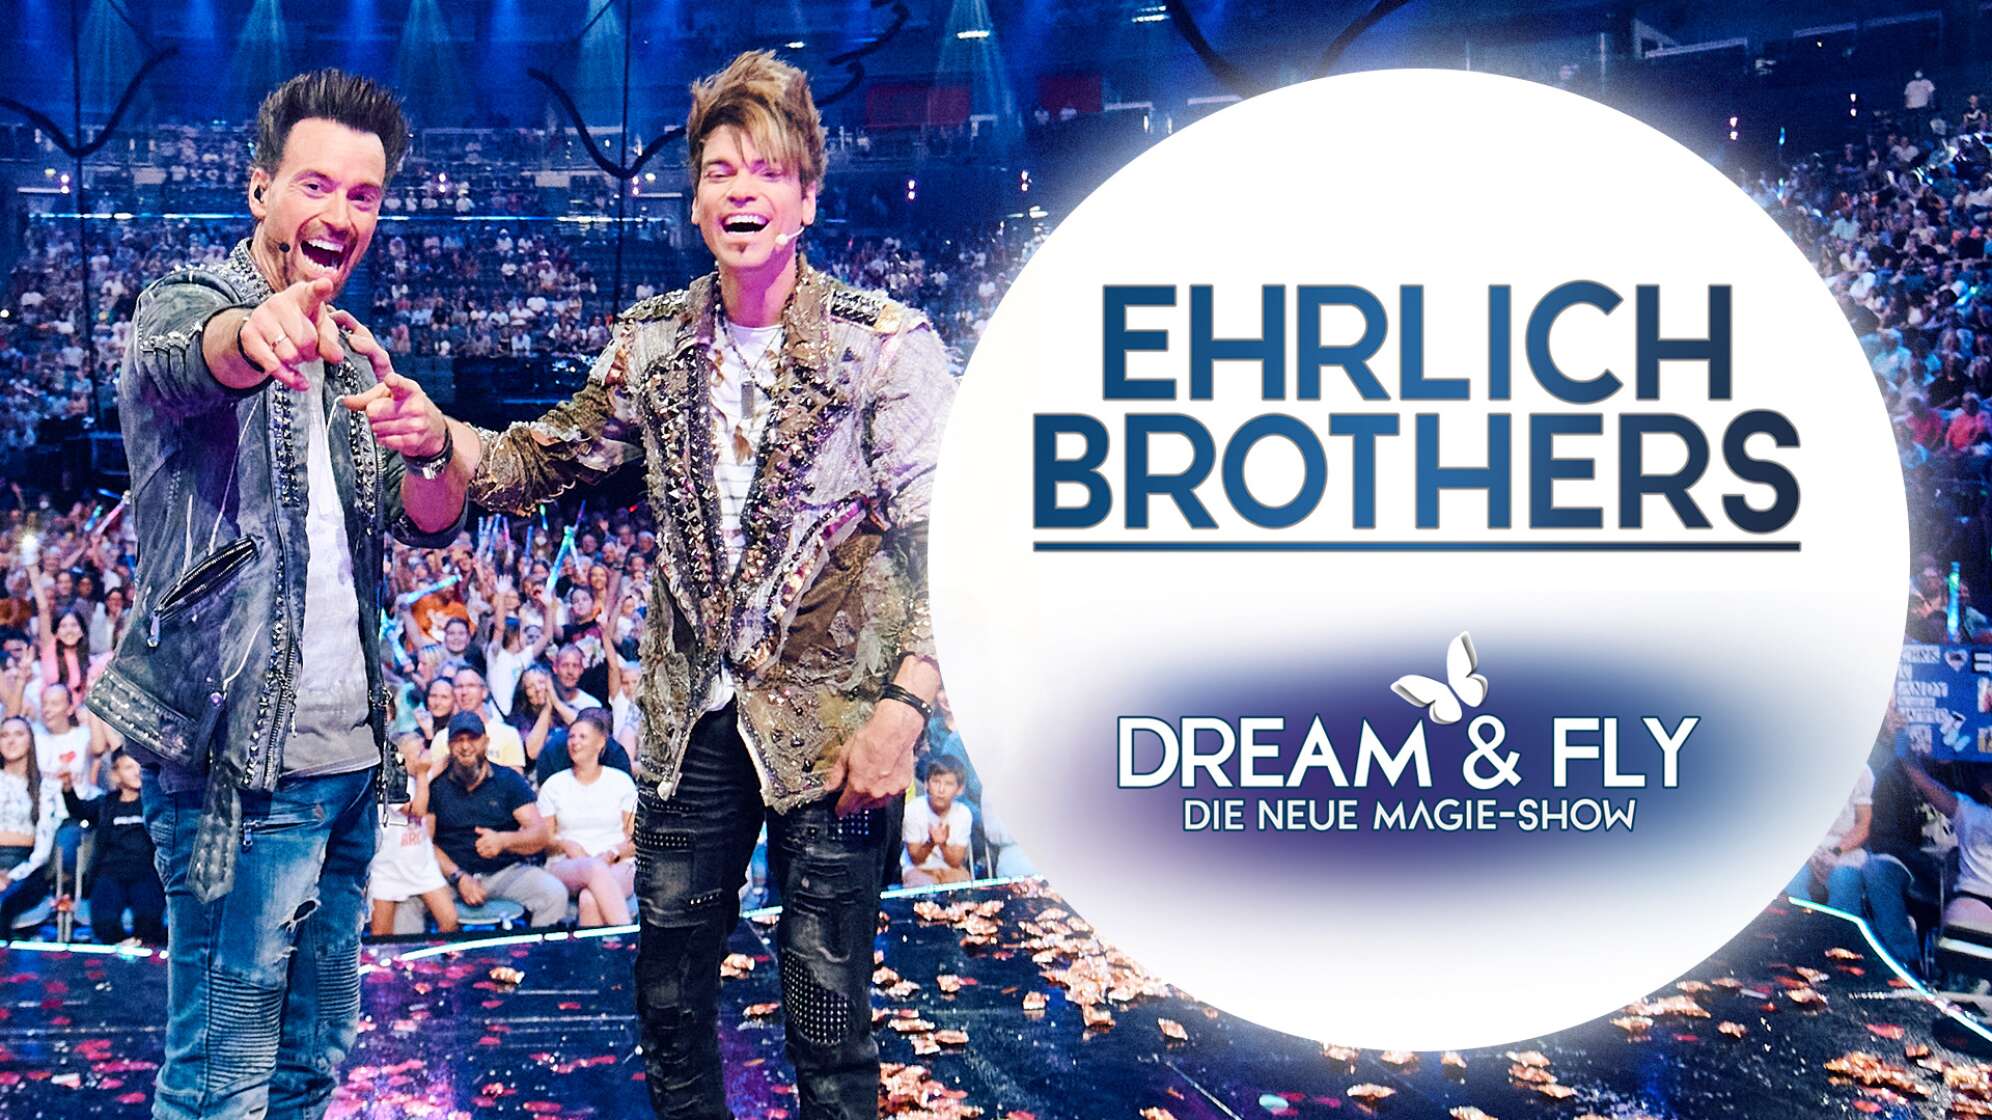 Ehrlich Brothers "Dream & Fly"